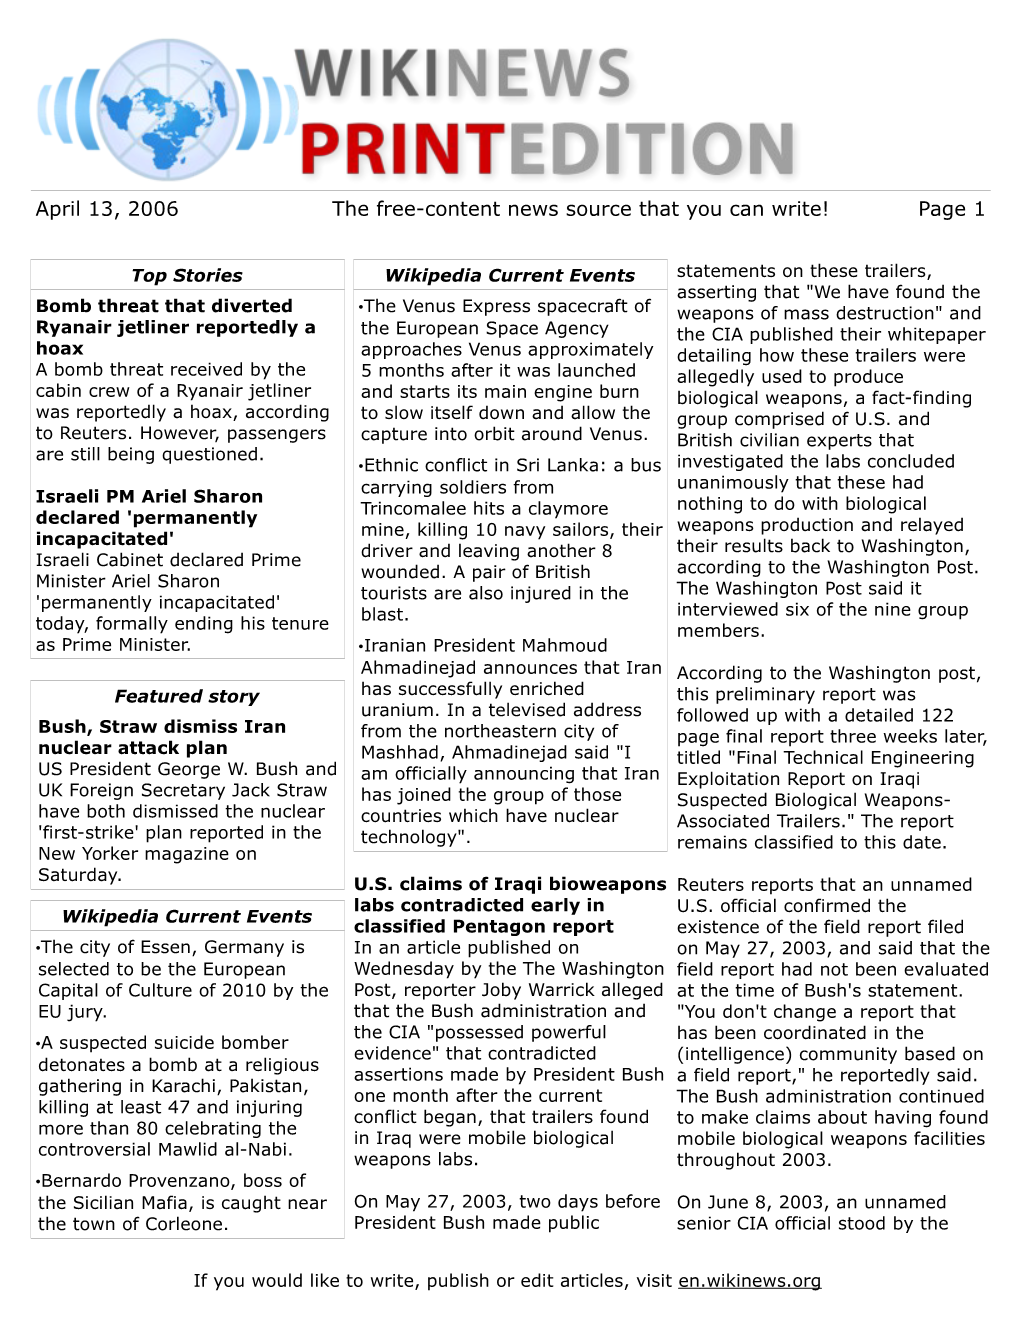 April 13, 2006 the Free-Content News Source That You Can Write! Page 1